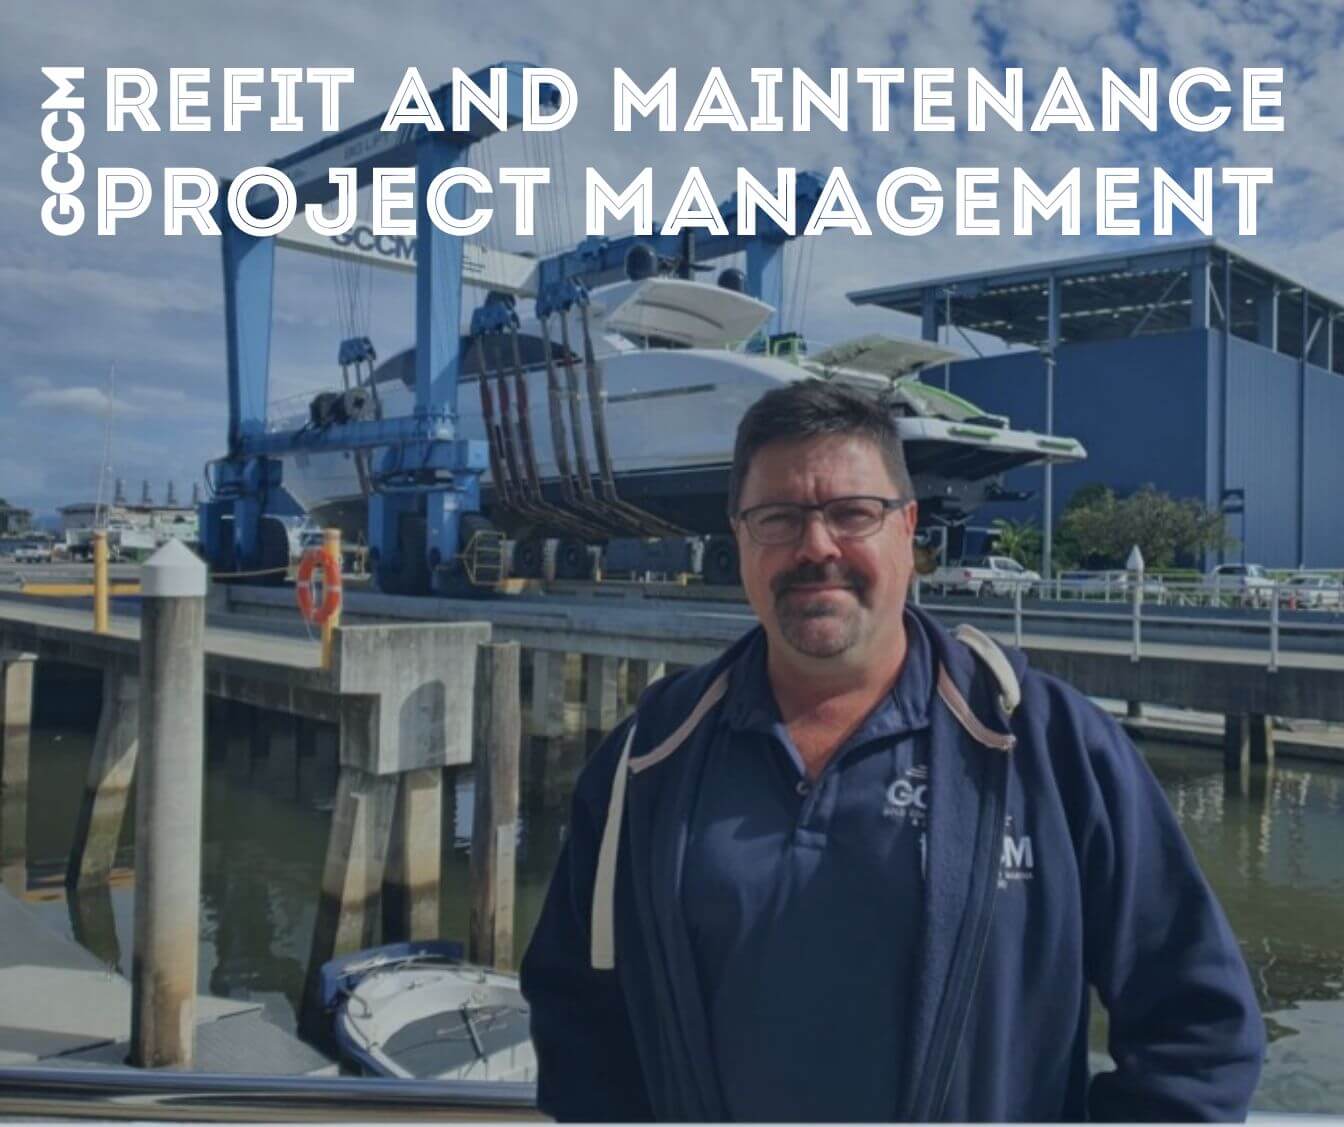 How easy is refit and maintenance Project Management at GCCM